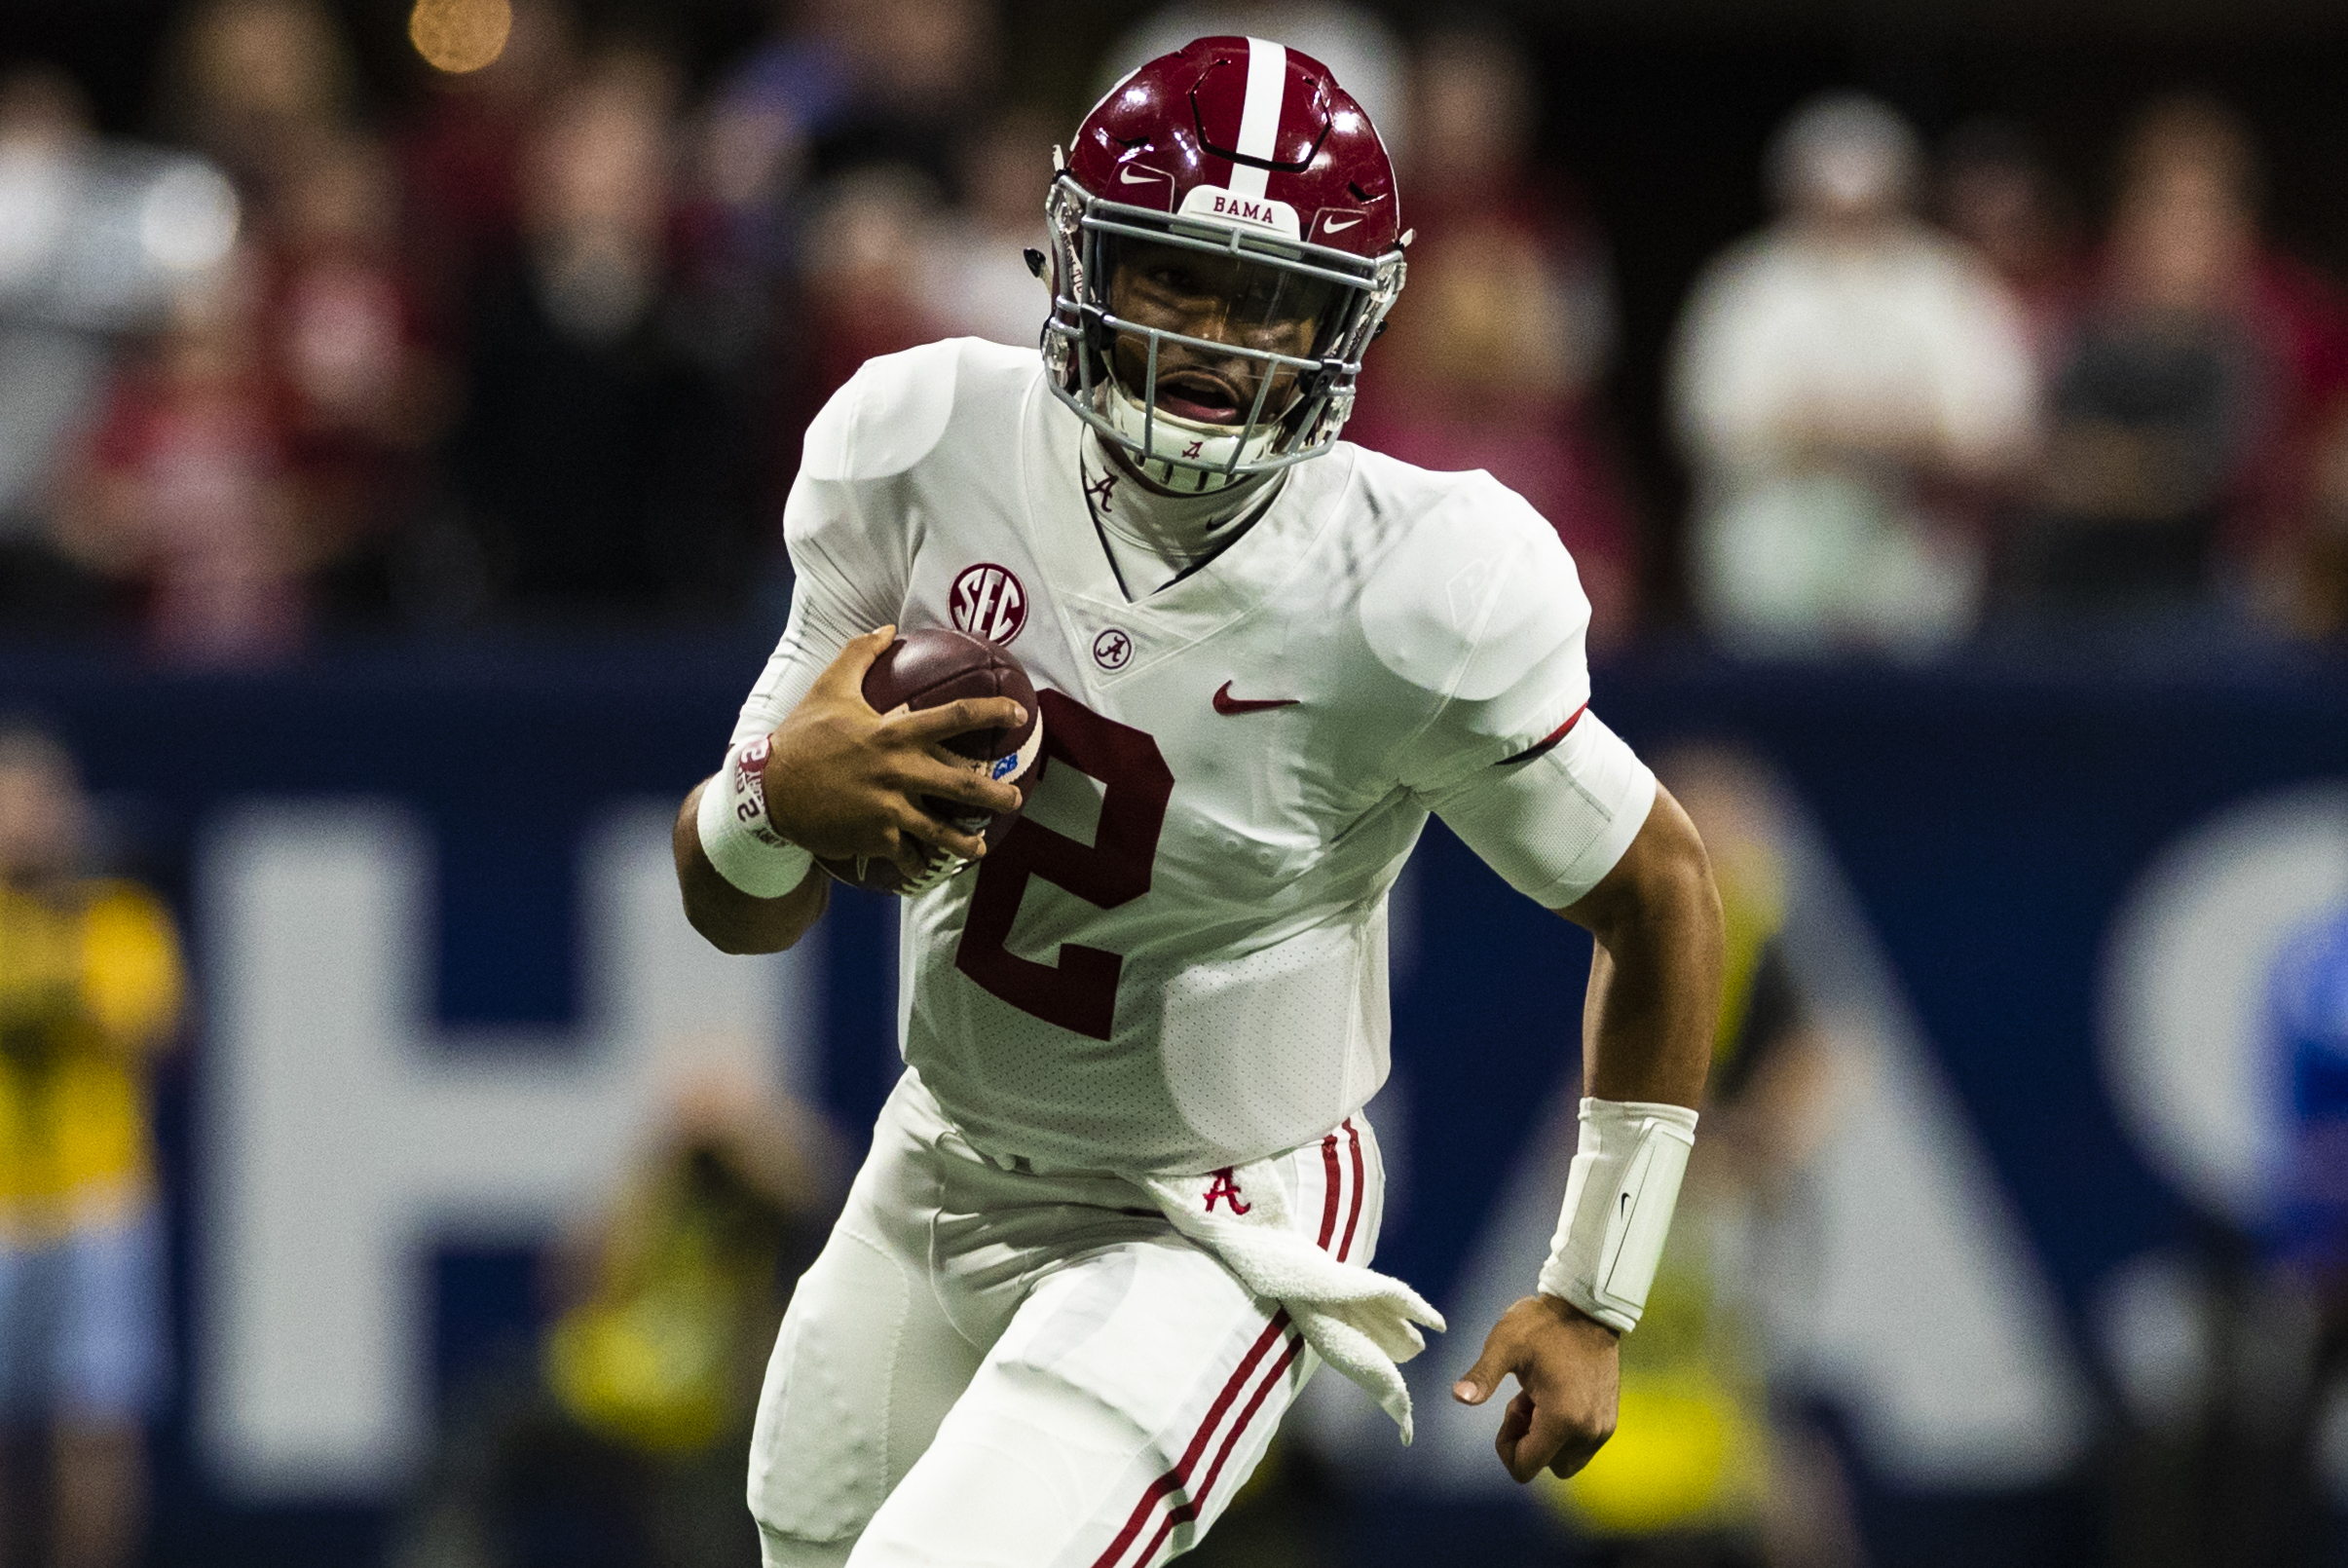 Video: Eagles' Jalen Hurts Announces on Twitter He'll Wear No. 2